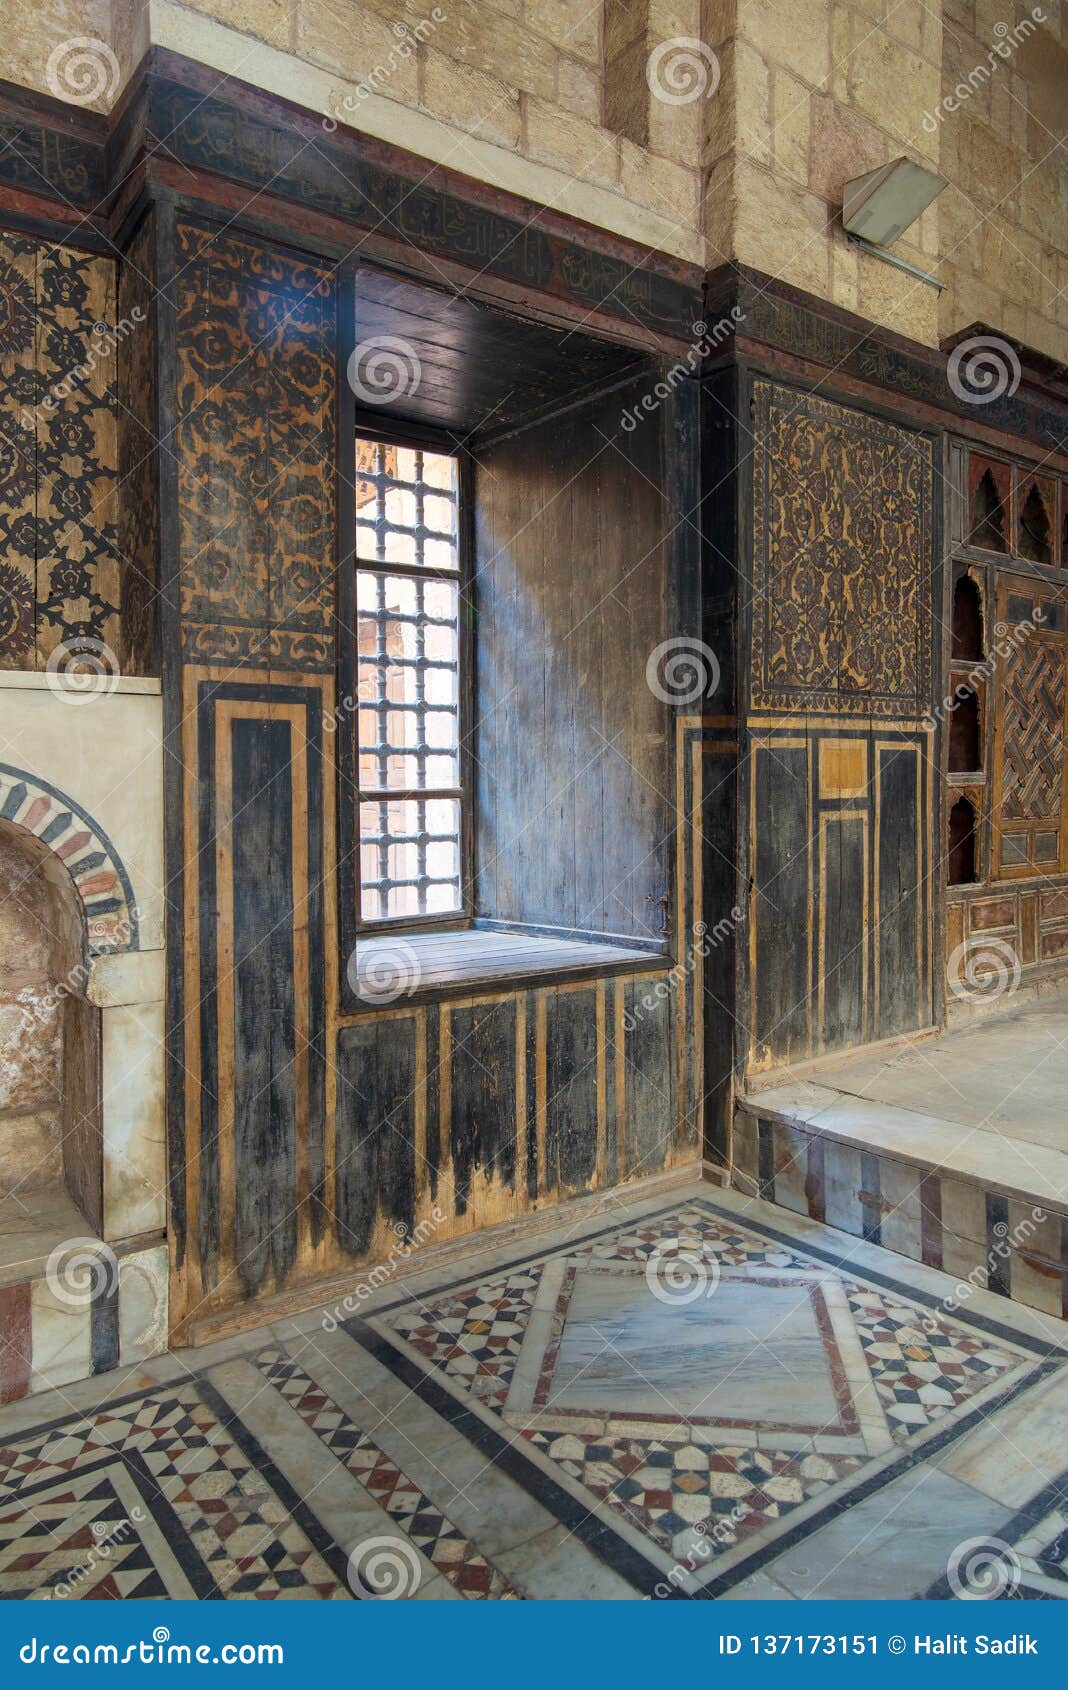 ottoman historic house of moustafa gaafar, darb al asfar district, cairo, egypt with decorated wooden wall and marble floor